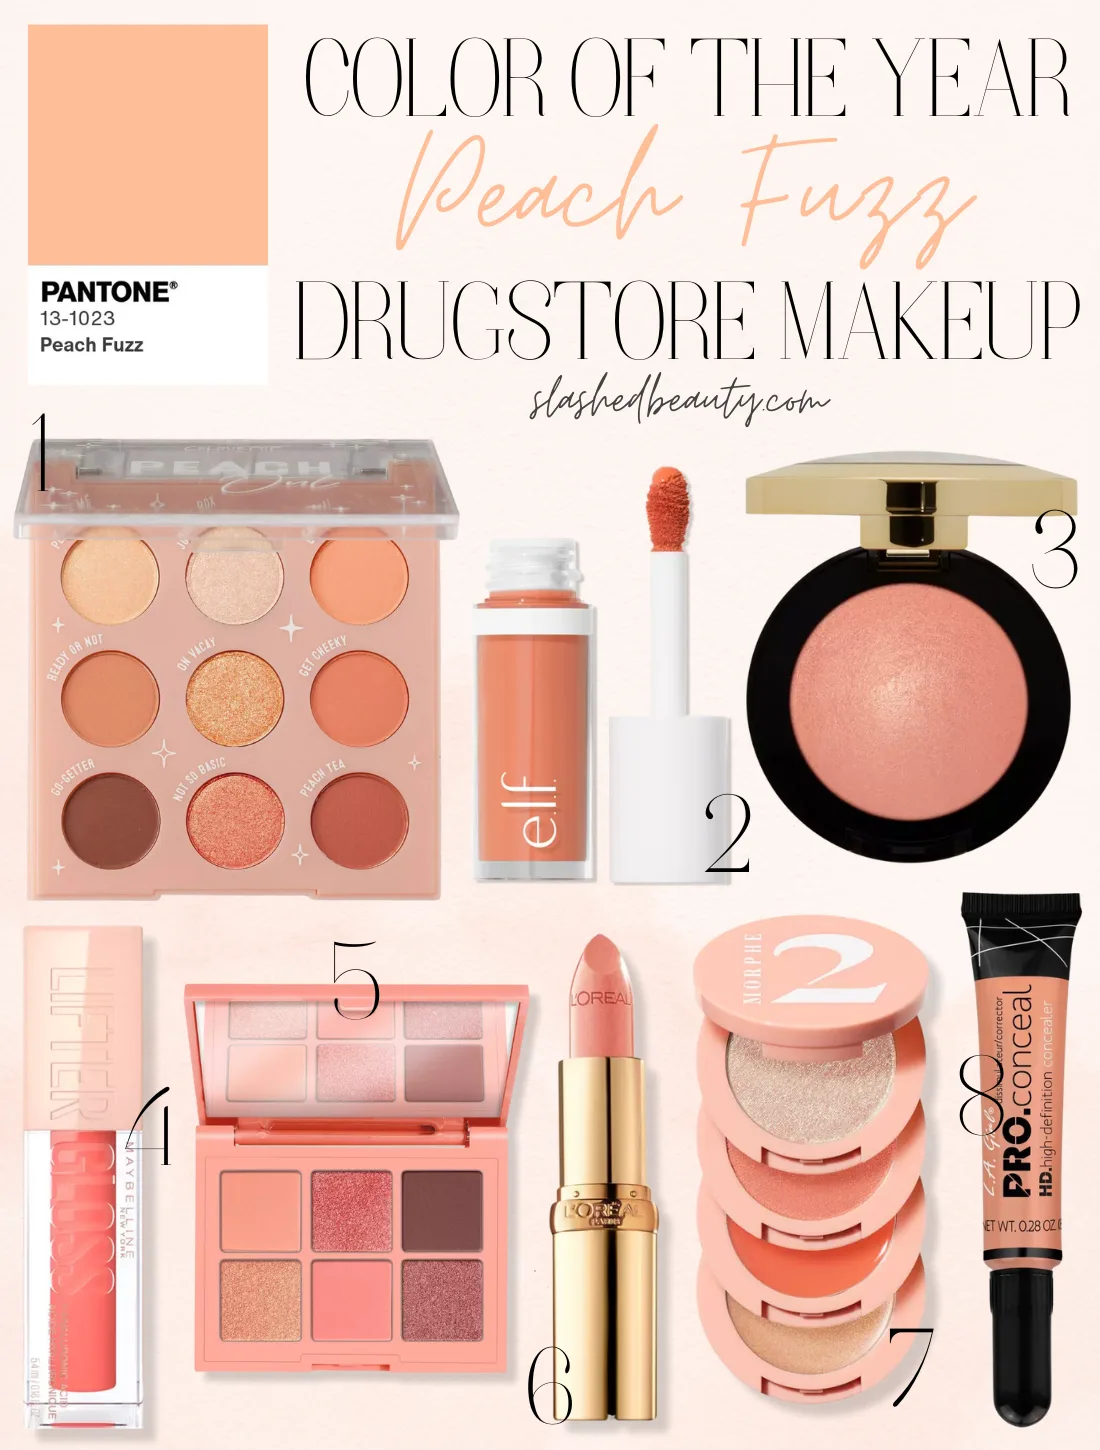 Collage of peach drugstore makeup products with title "Color of the Year: Peach Fuzz Drugstore Makeup" | Slashed Beauty